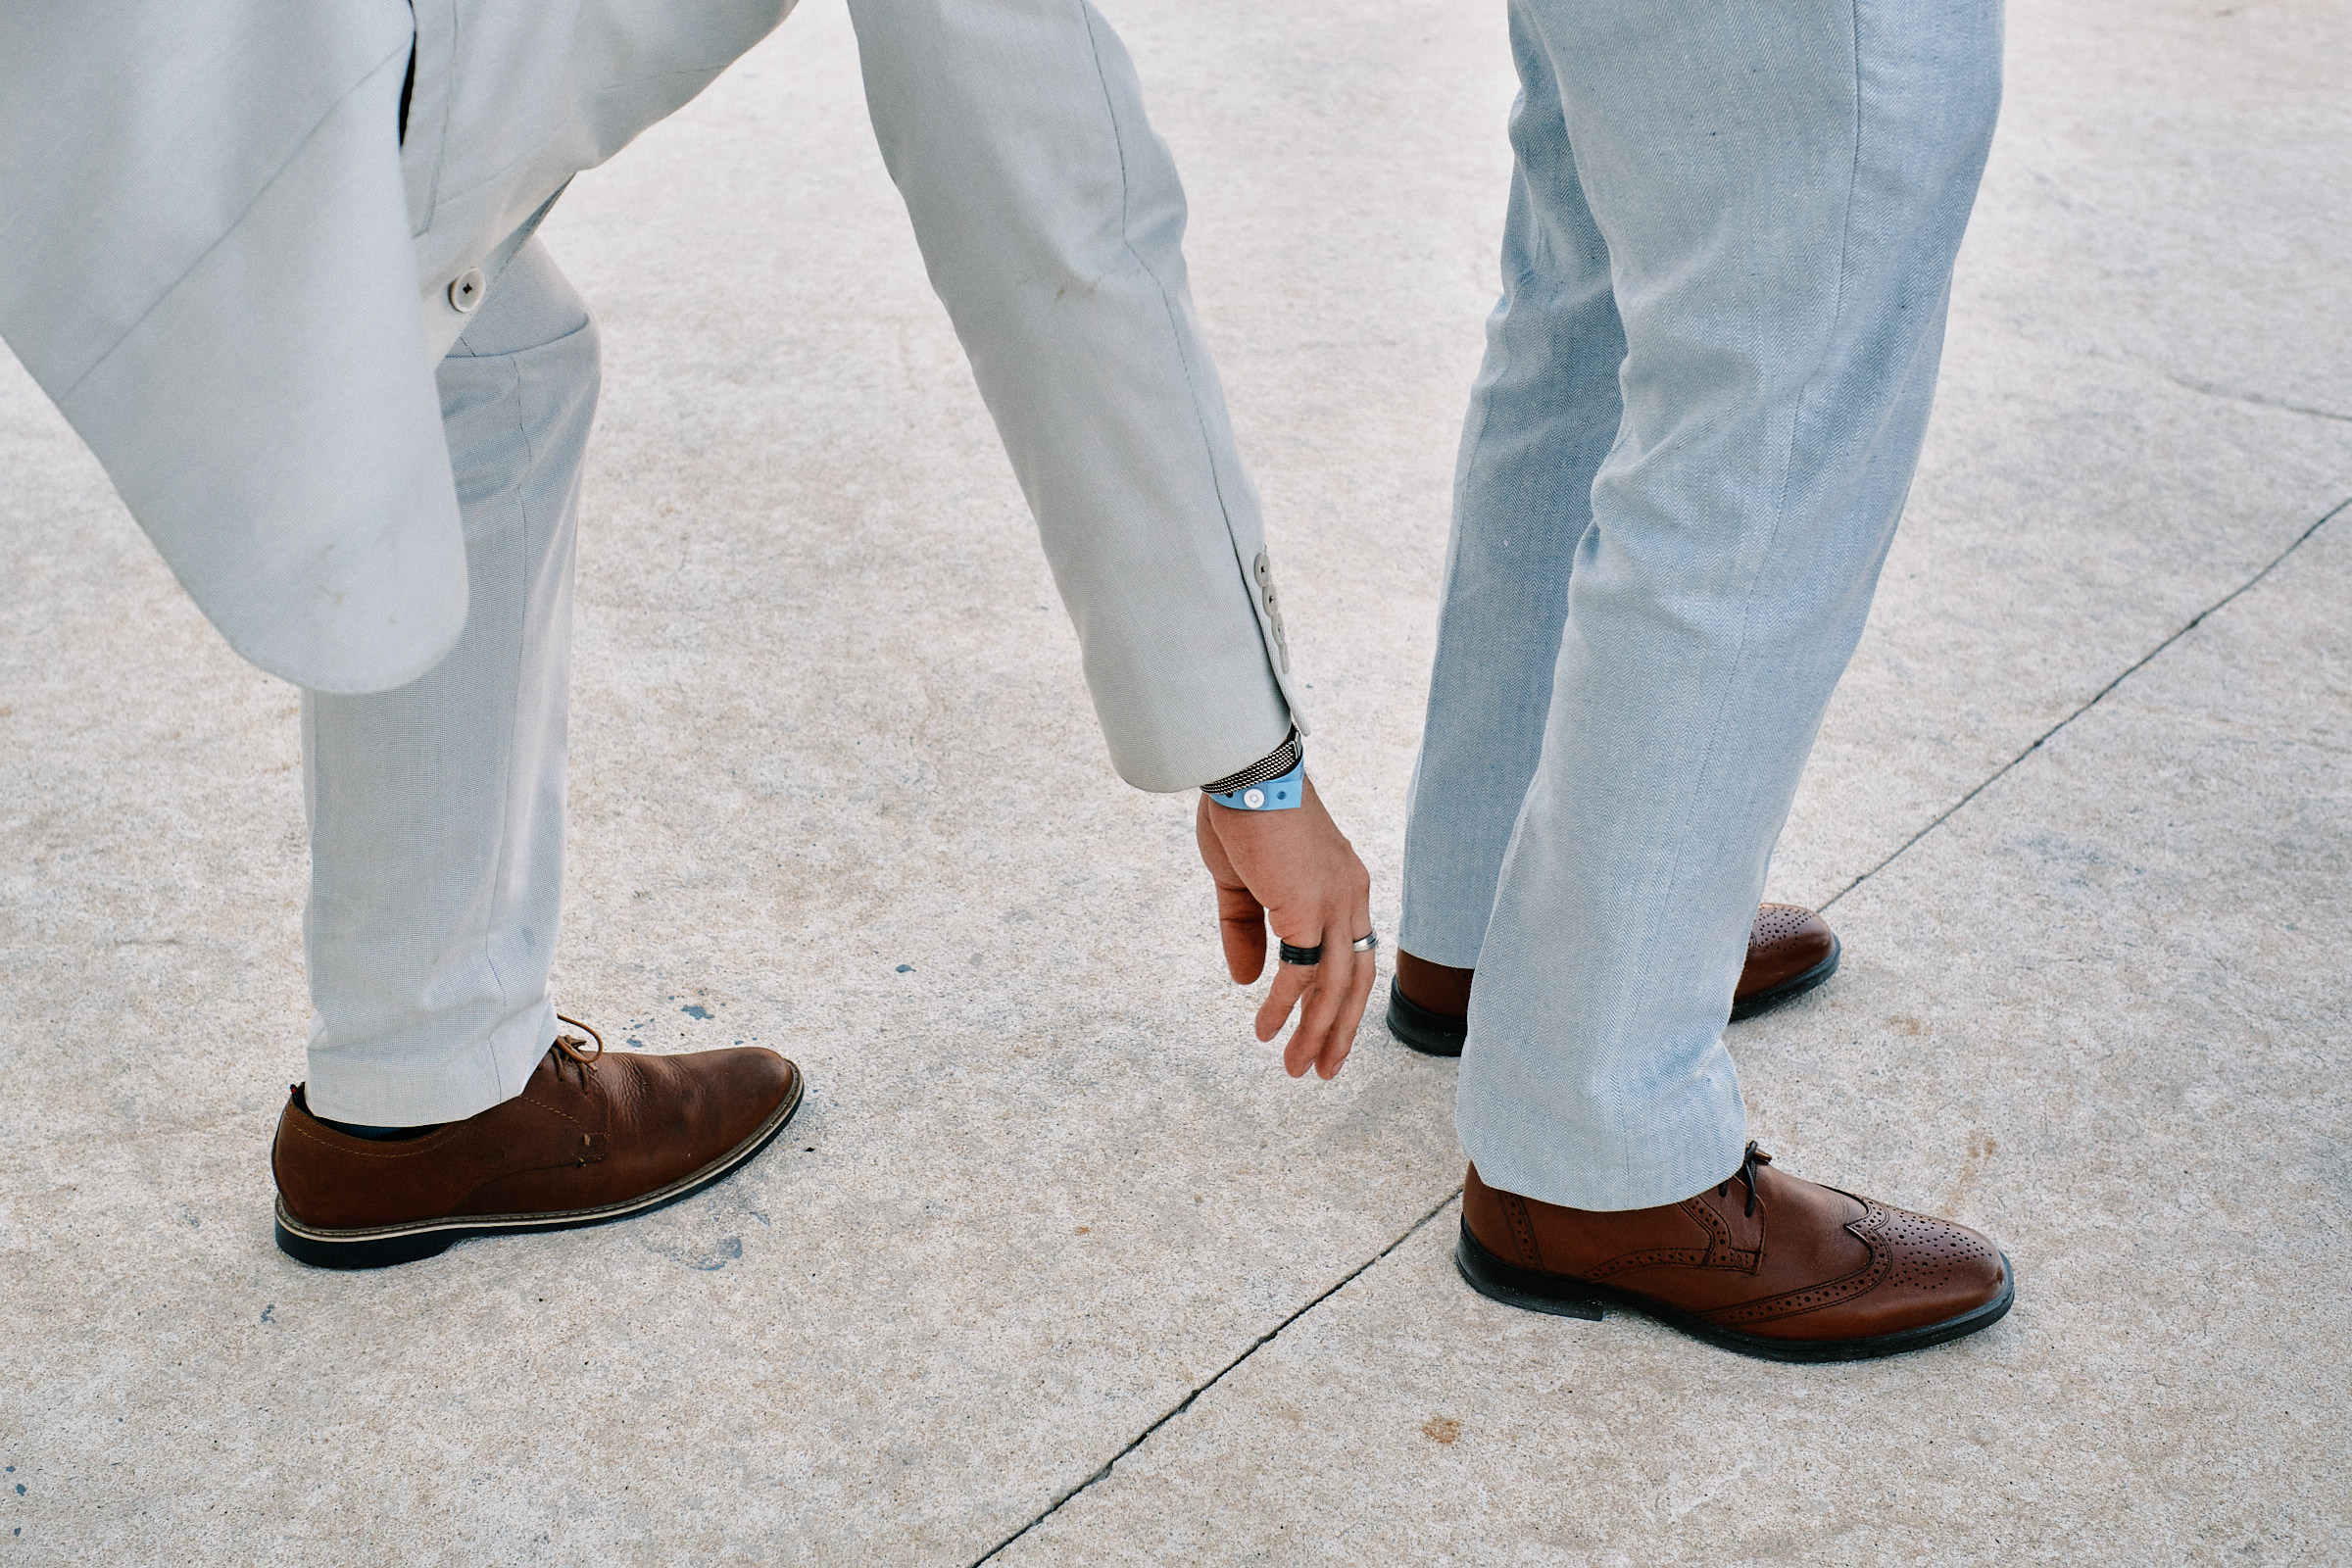 Groomsmen Help One Another To Fix Their Attire